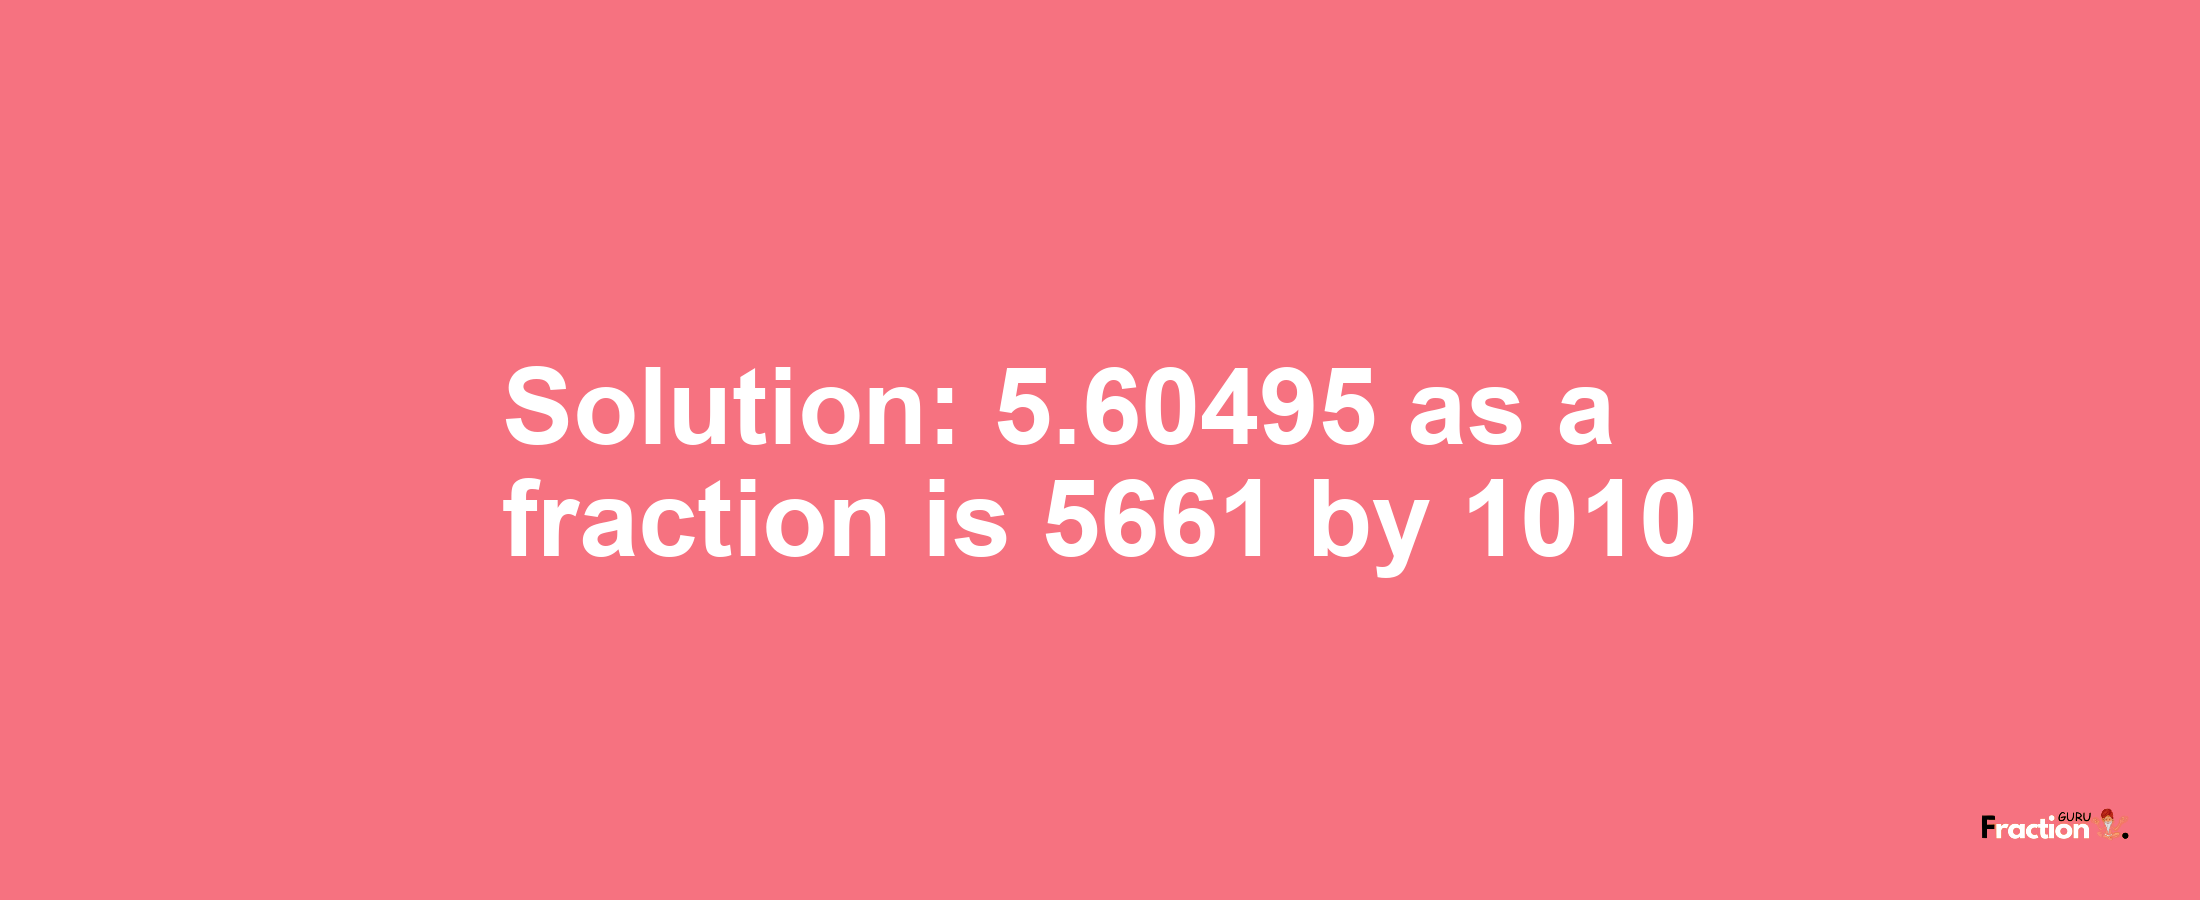 Solution:5.60495 as a fraction is 5661/1010